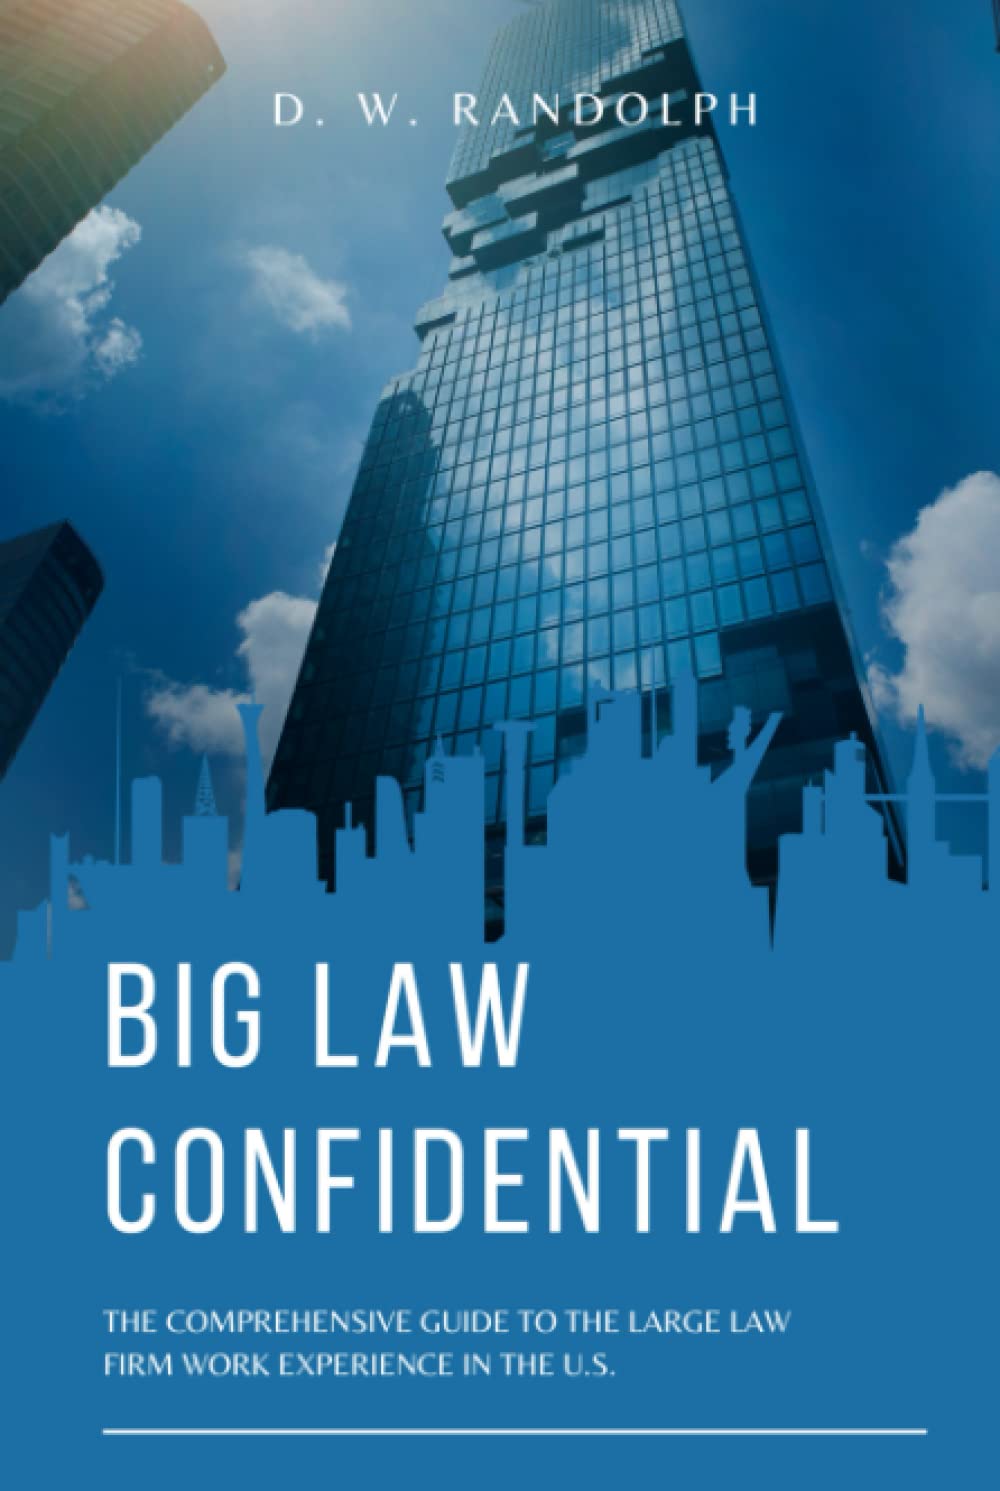 New book "Big Law Confidential" by D.W. Randolph is released, providing an inside look at what it’s truly like to work for world’s largest law firms